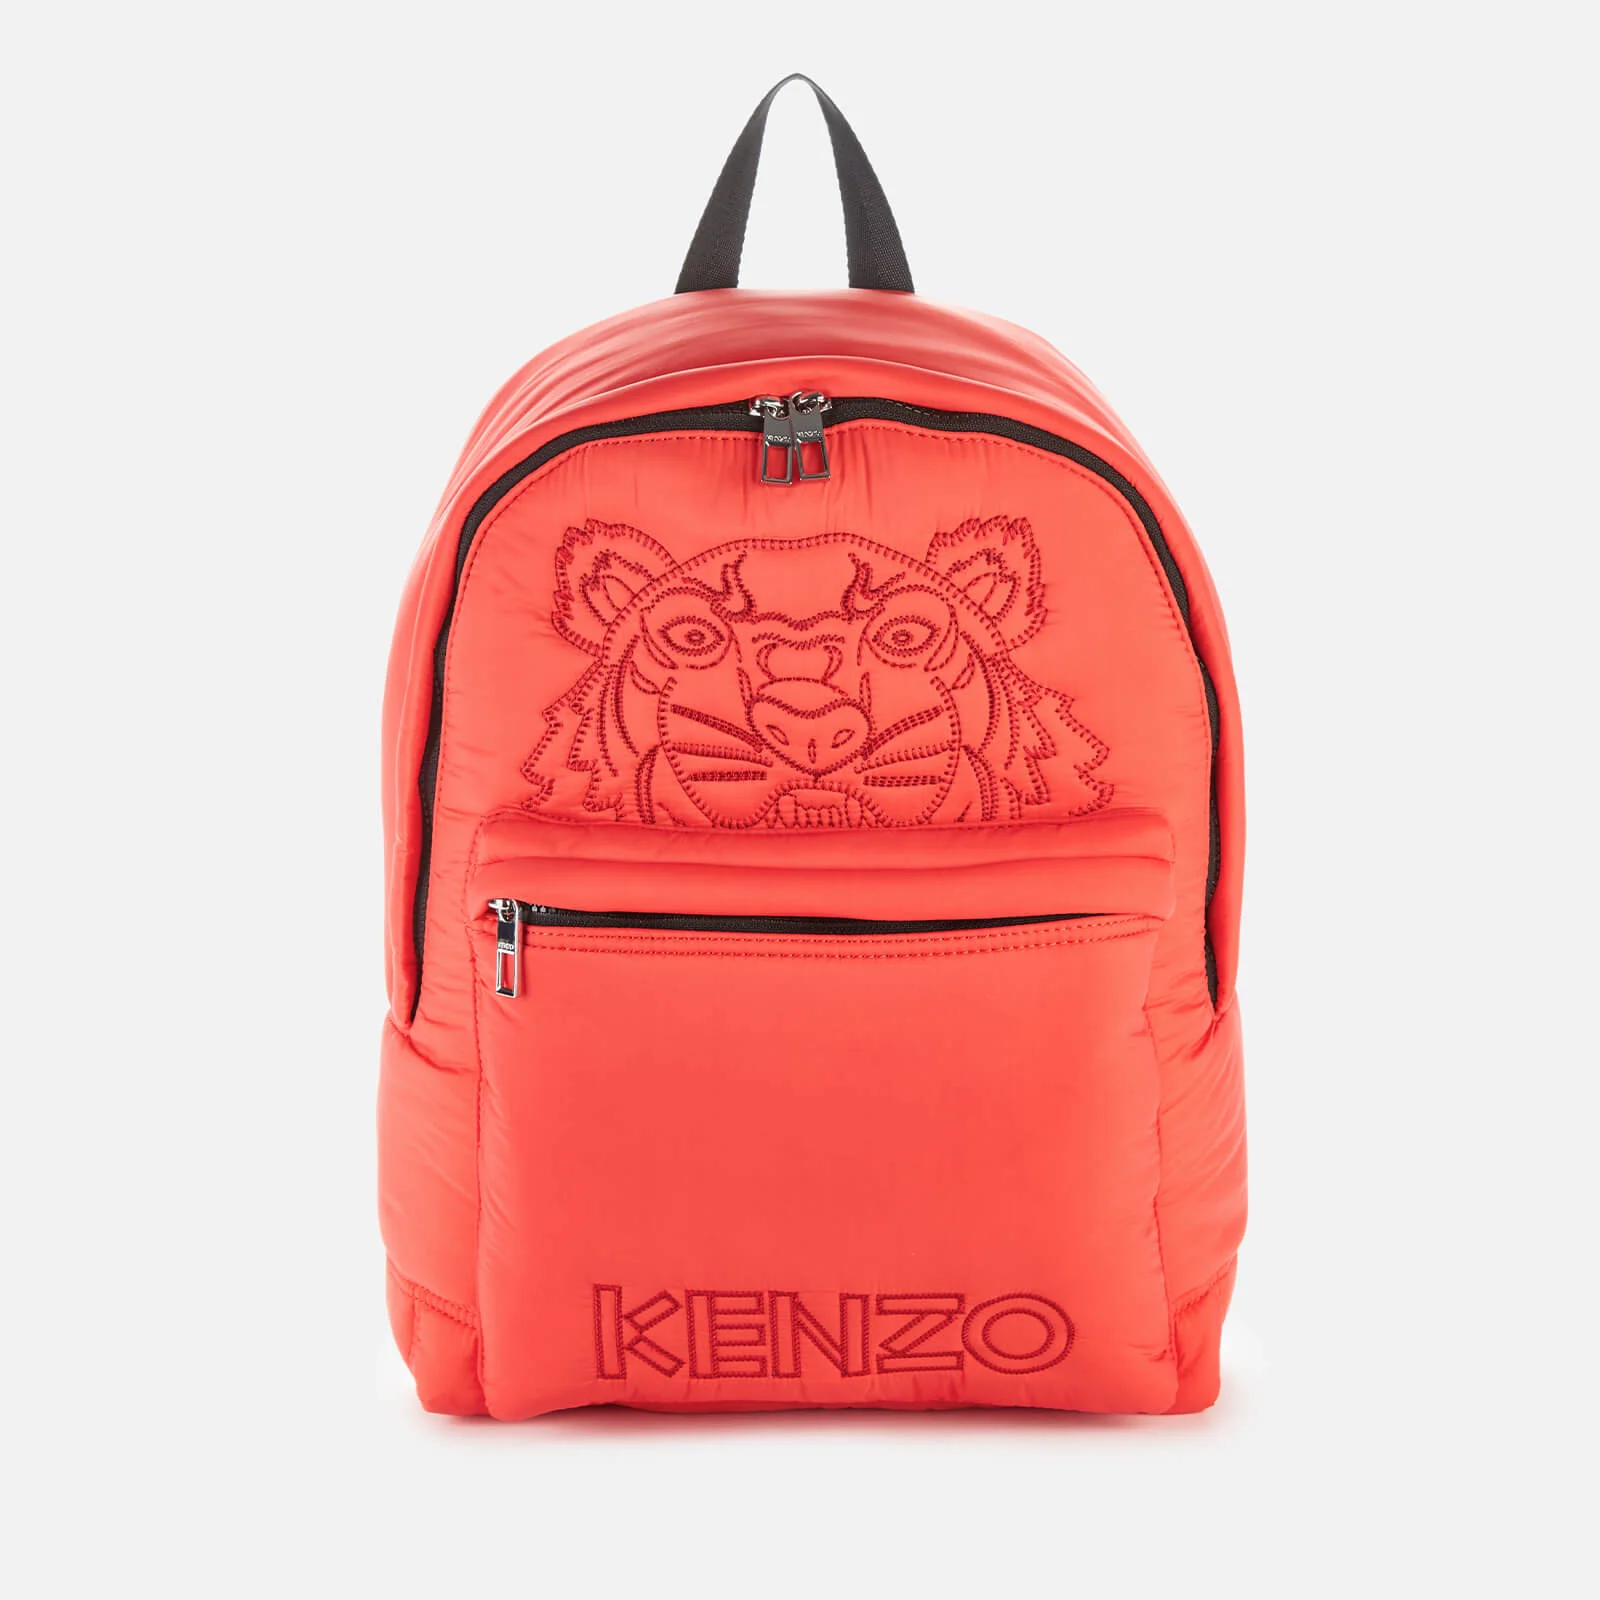 KENZO Women's Quilted Tiger Backpack - Red Image 1